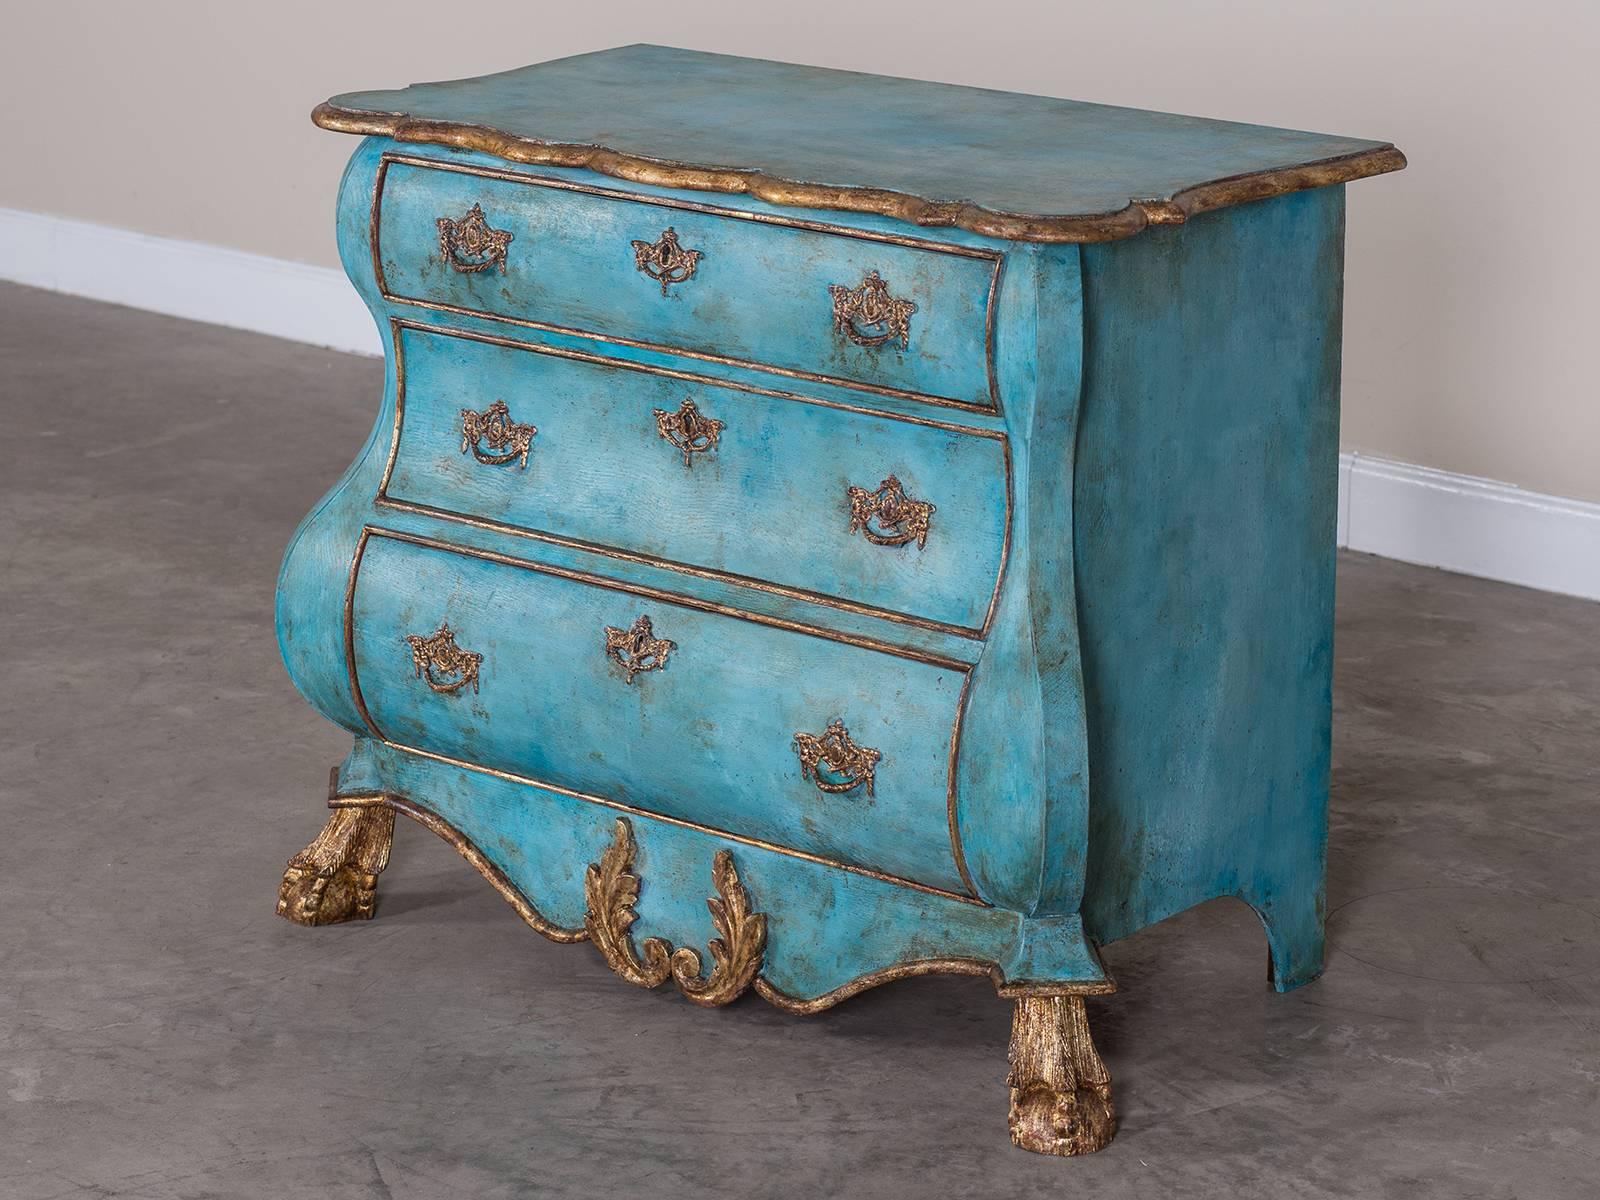 Mid-19th Century Dutch Painted and Gilded Oak Bombé Commode Chest of Drawers, Holland, circa 1850